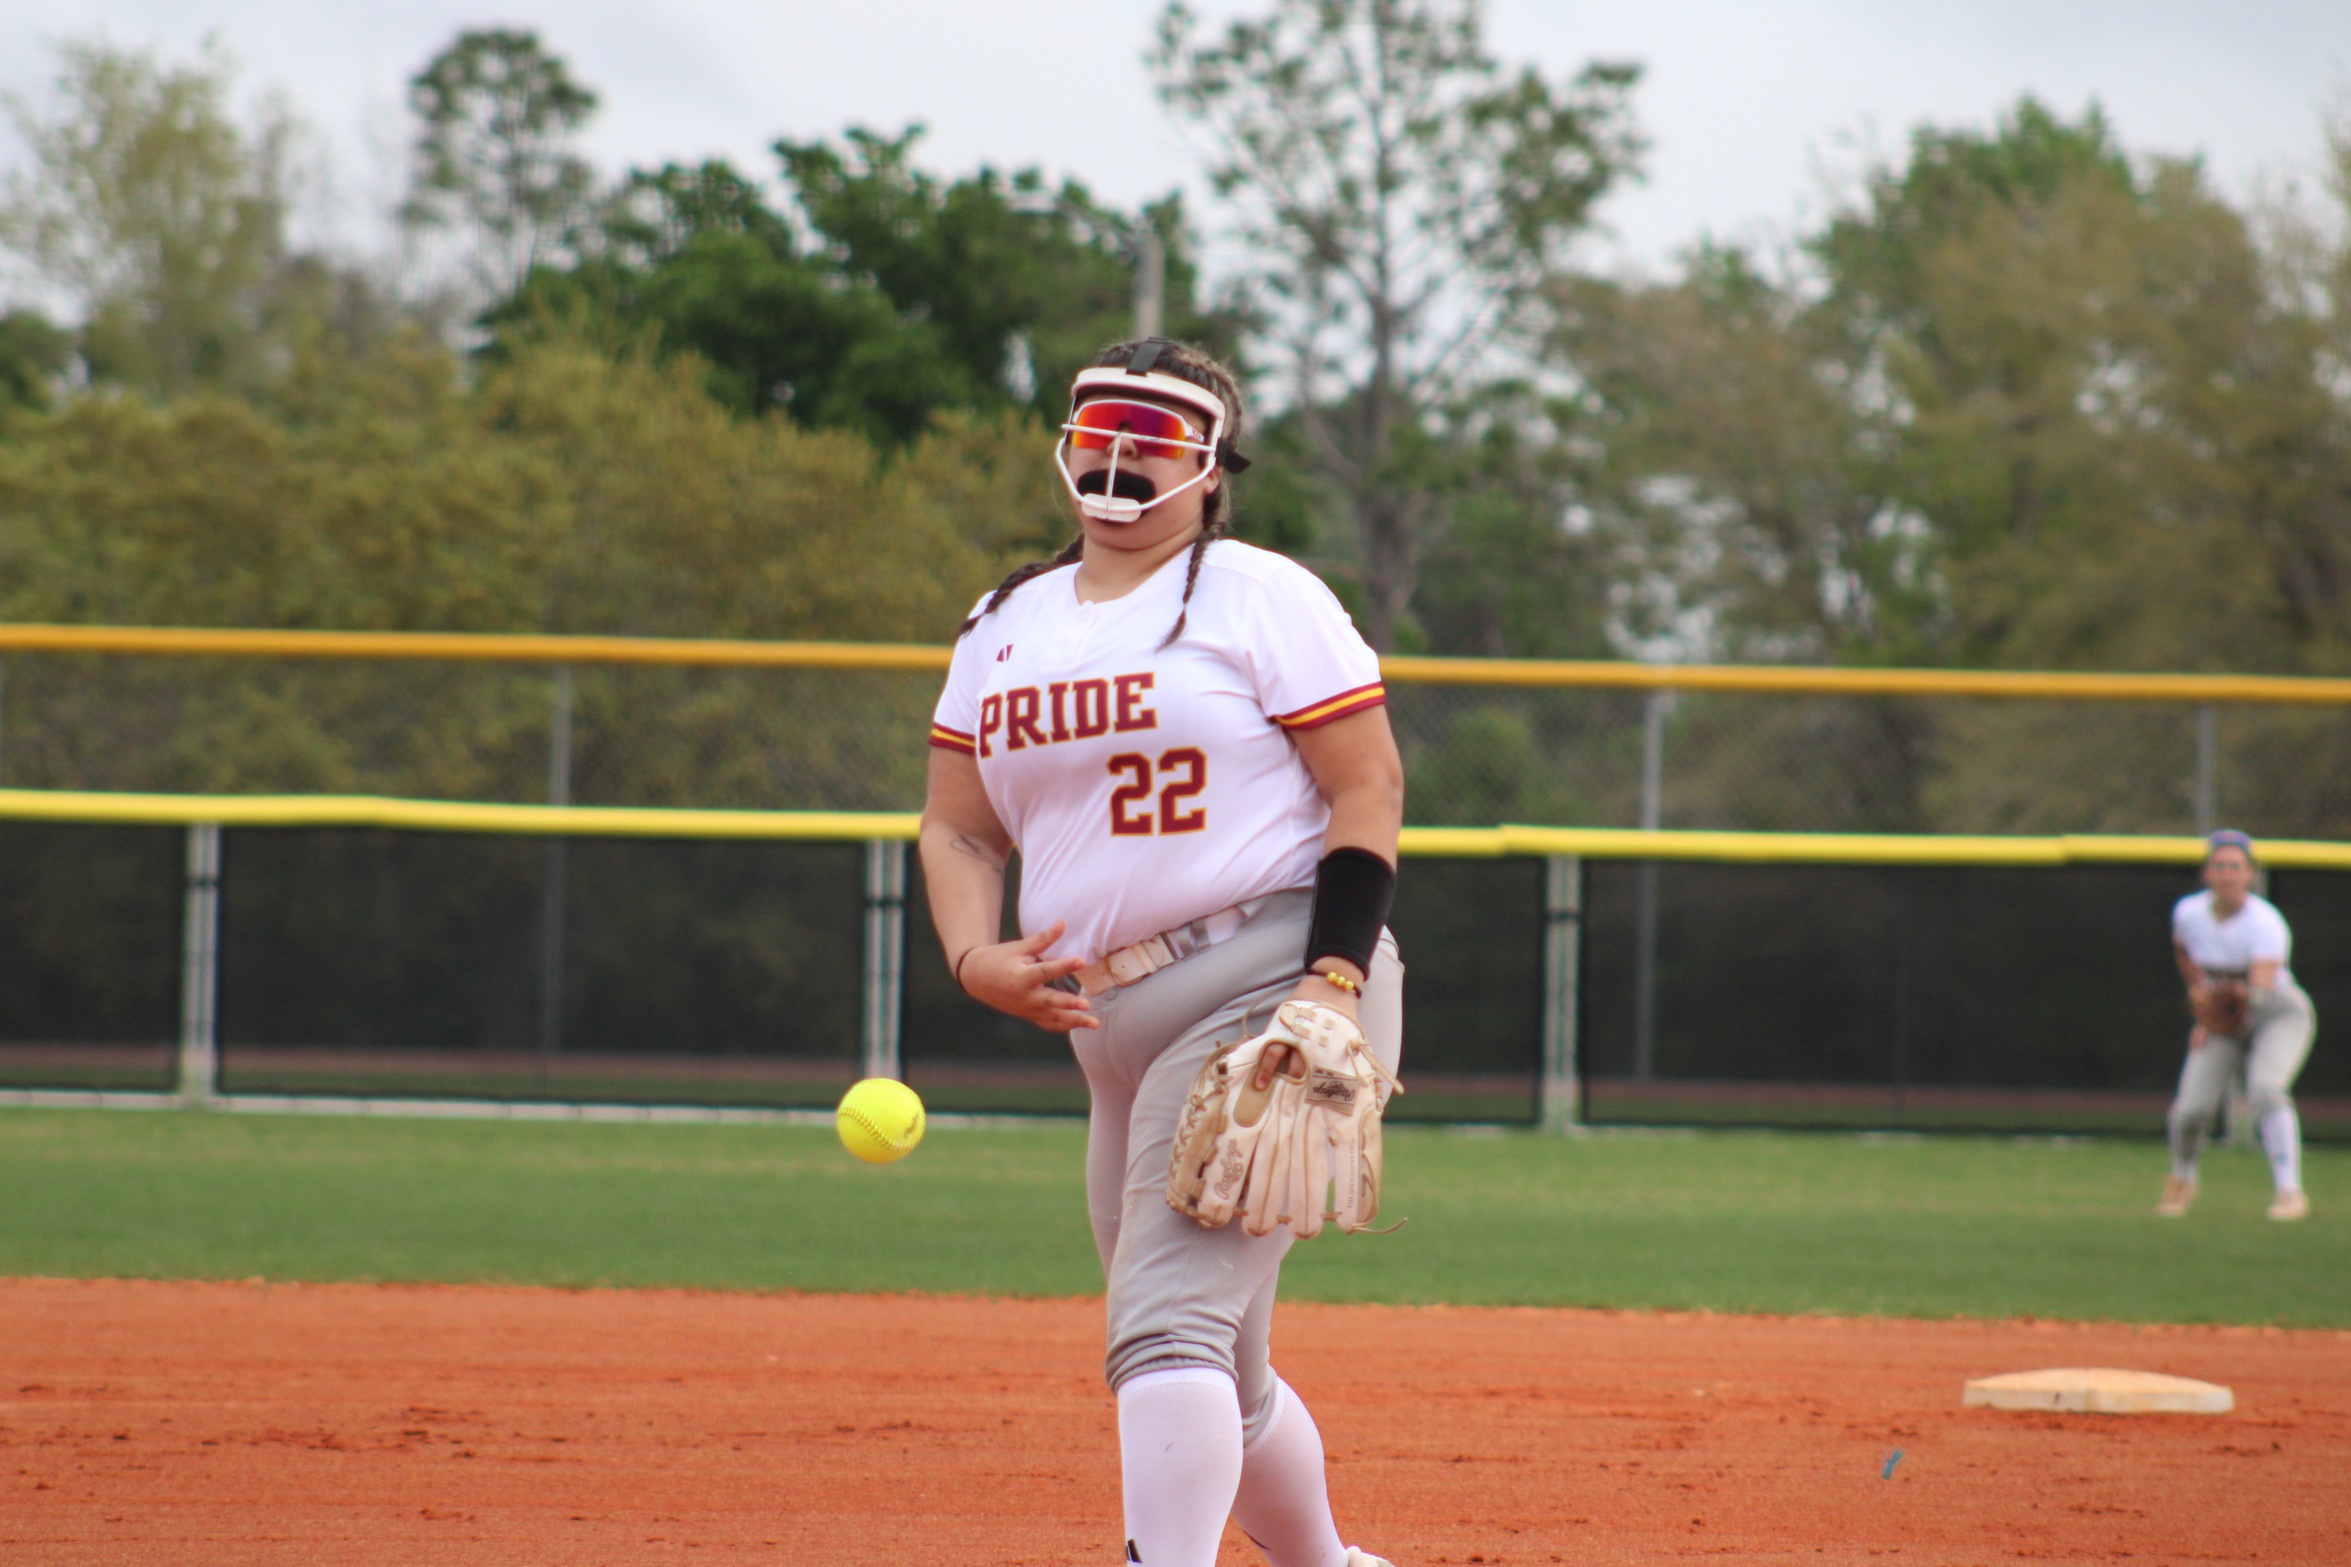 Regis Softball Sweeps Elms in Conference Doubleheader